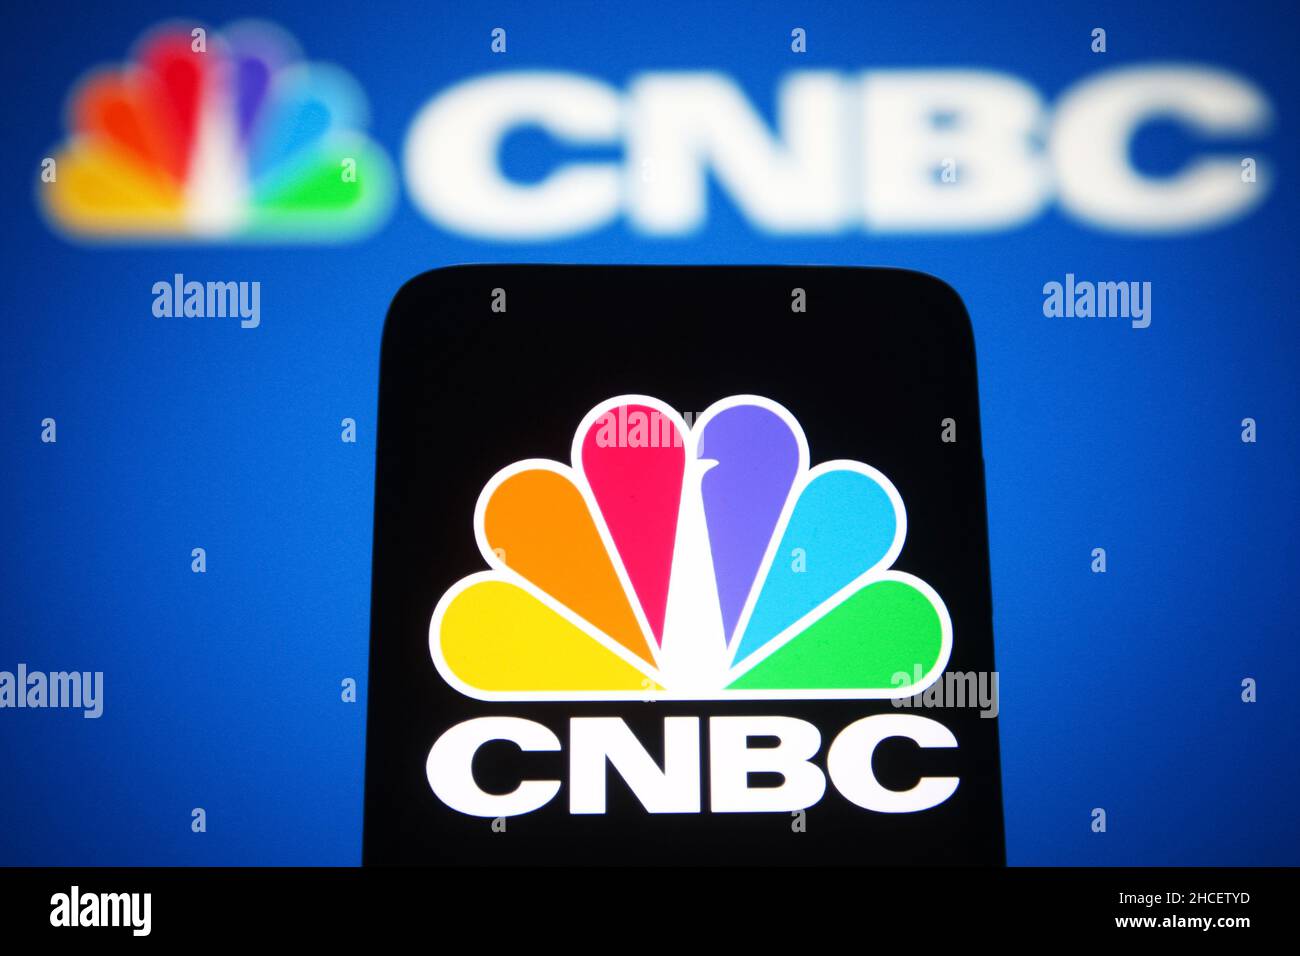 In this photo illustration, CNBC (Consumer News and Business Channel) logo is seen on a smartphone and in the background. Stock Photo